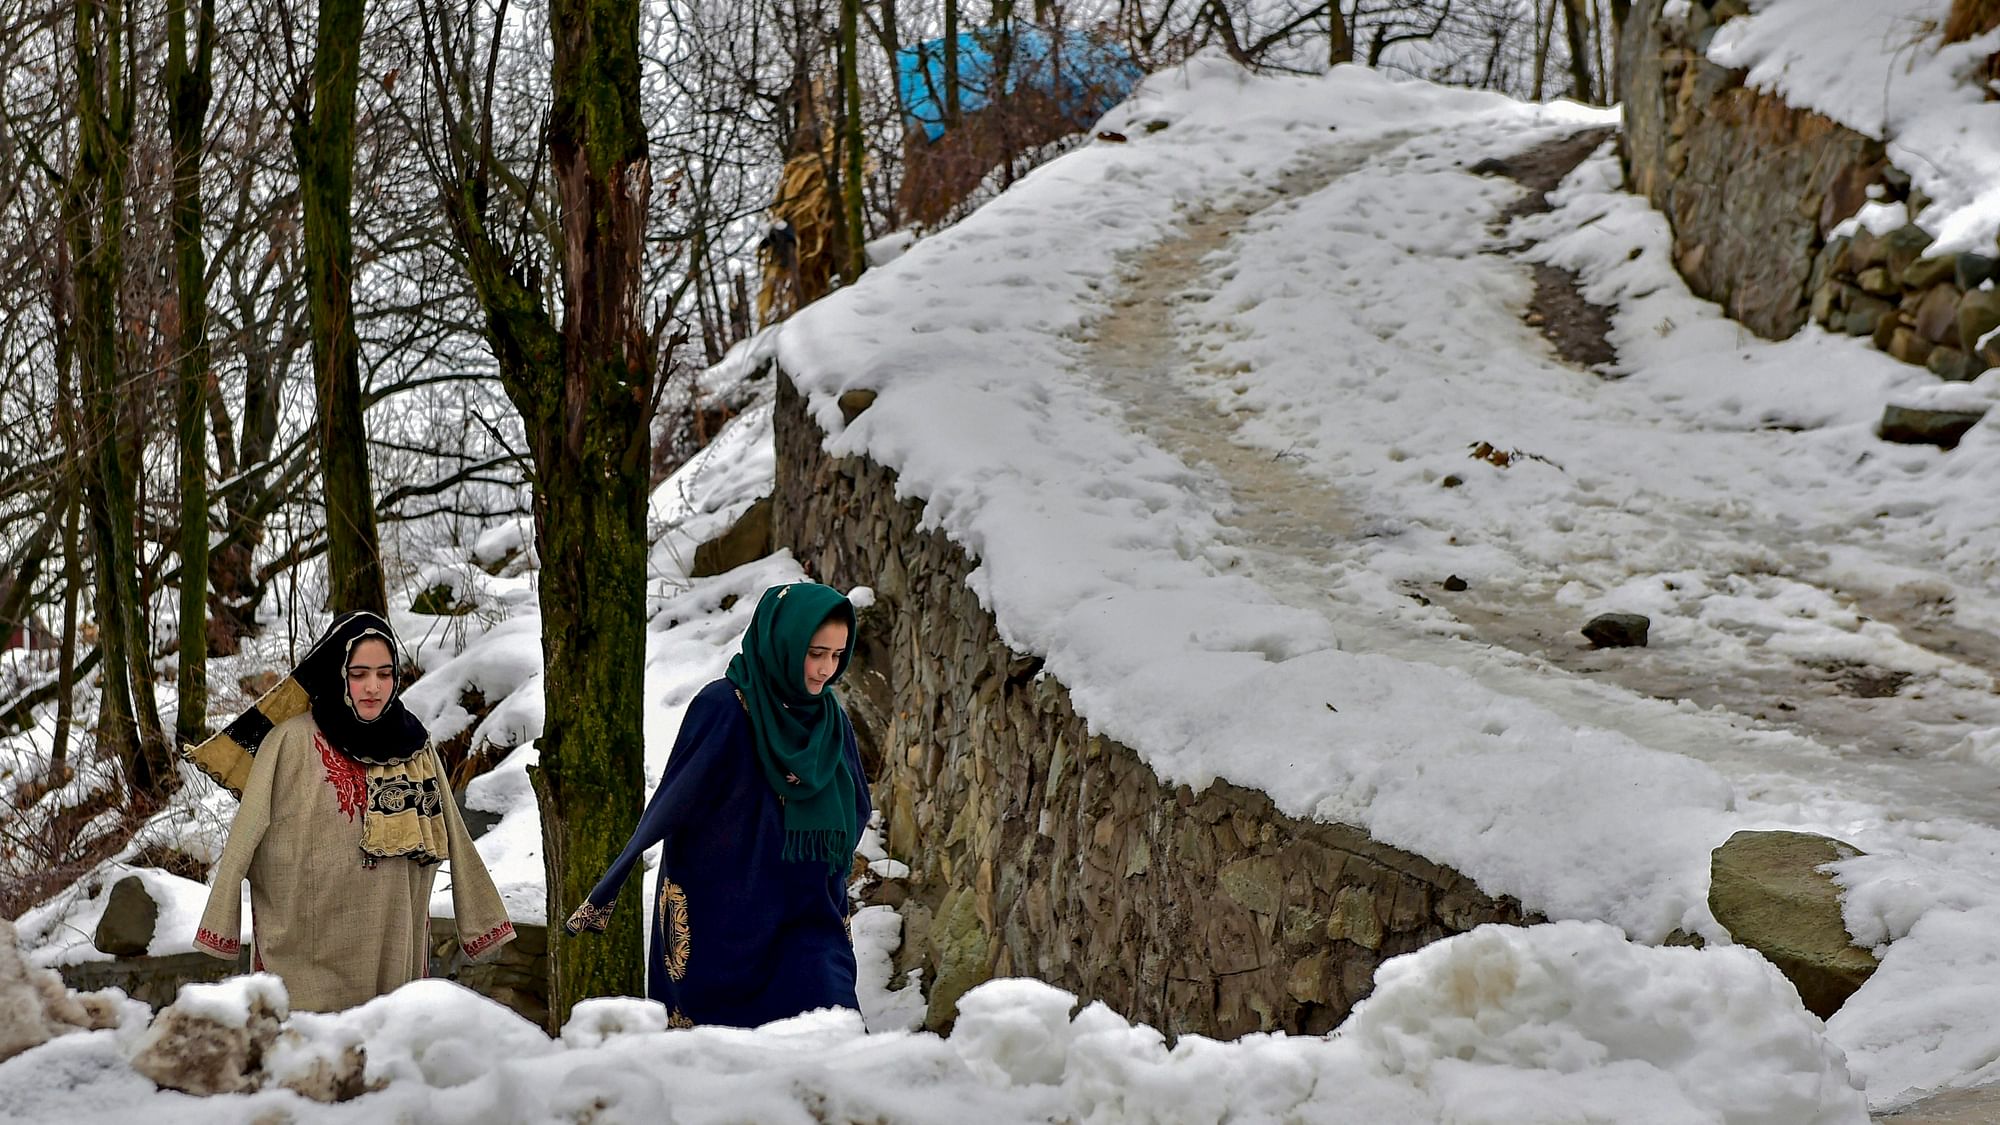 People walk on snow-covered path, on the outskirts of Srinagar.